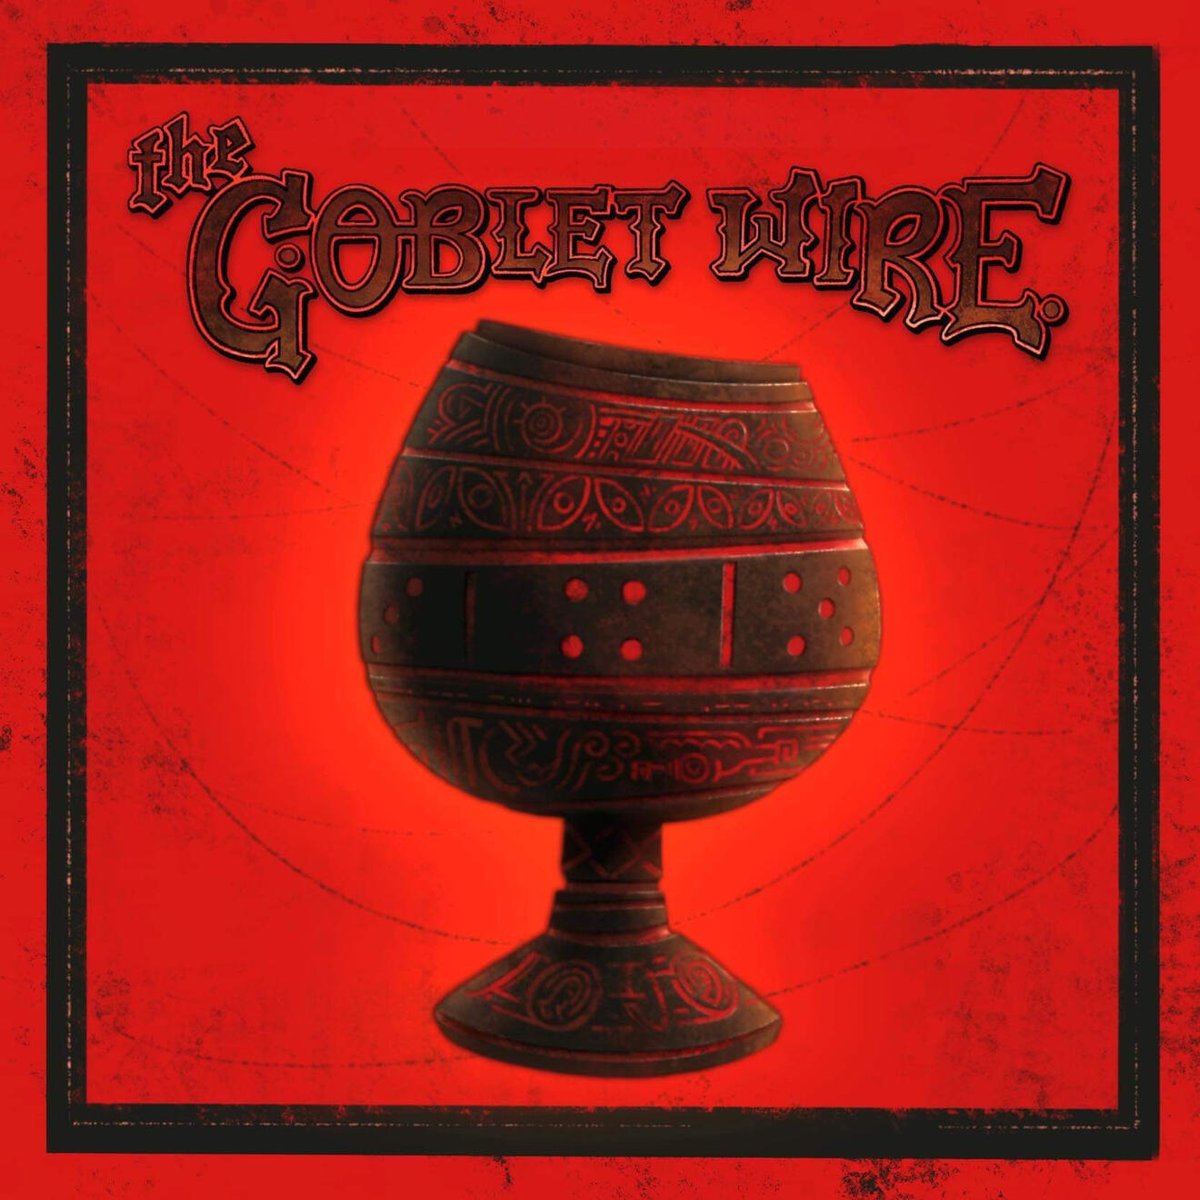 Cover art for The Goblet Wire. A stout goblet with a slanted rim carved with the faces of a die.